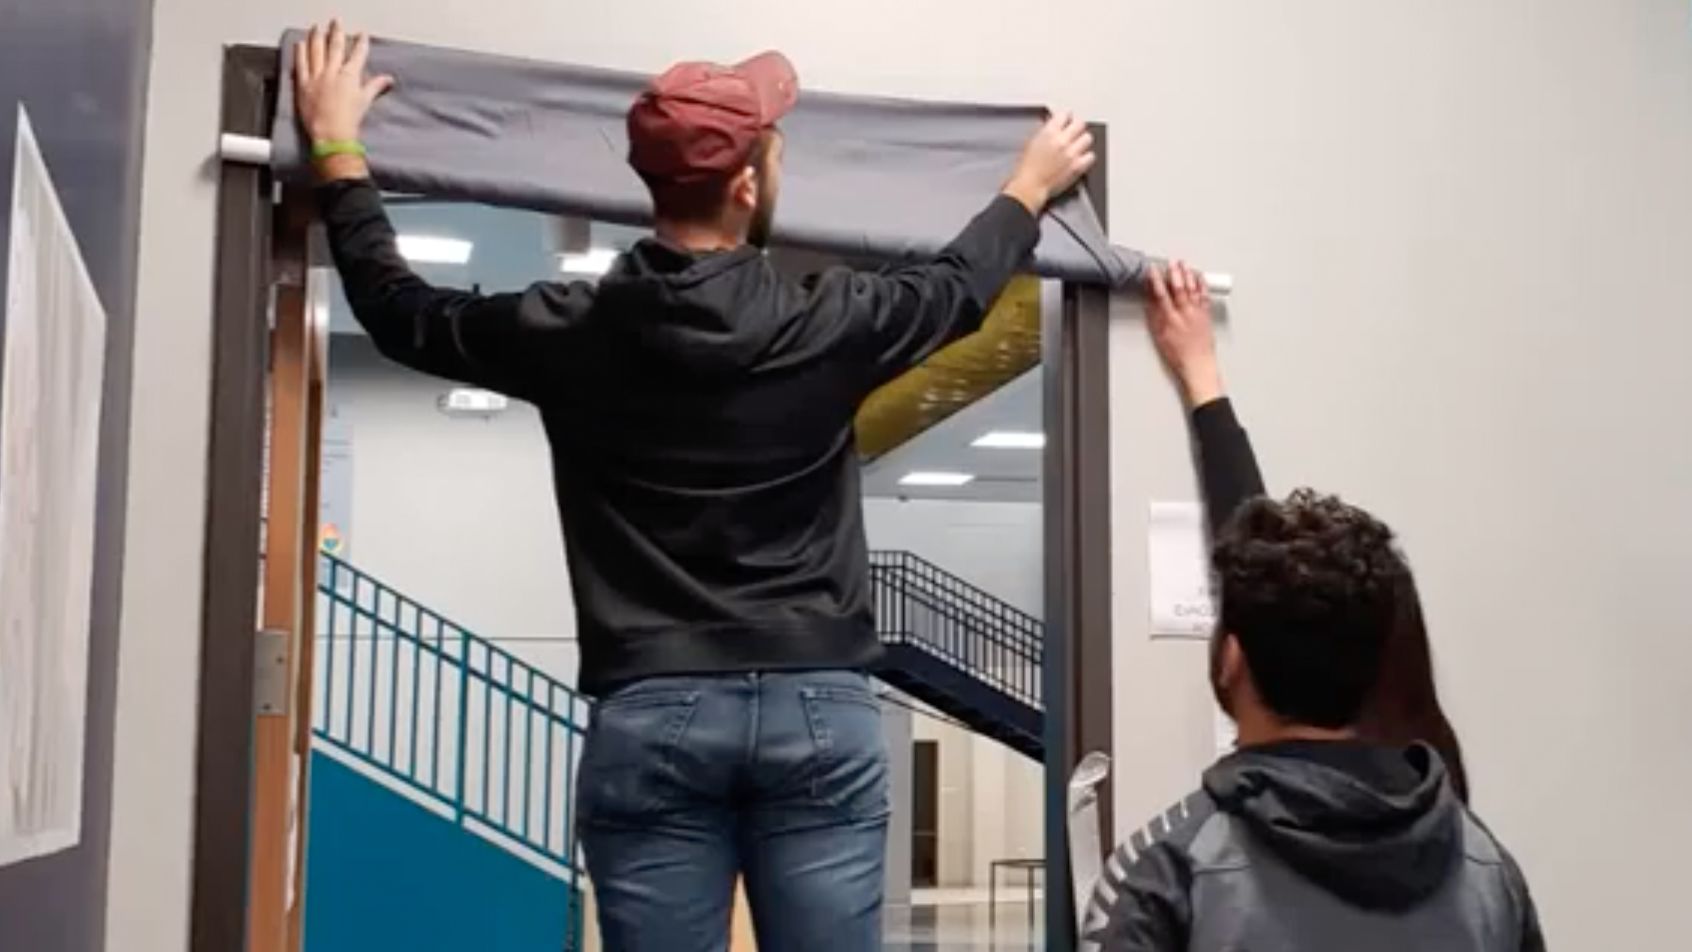 Richland Two Institute students put up a curtain that can be remotely lowered to block a shooter's visibility.